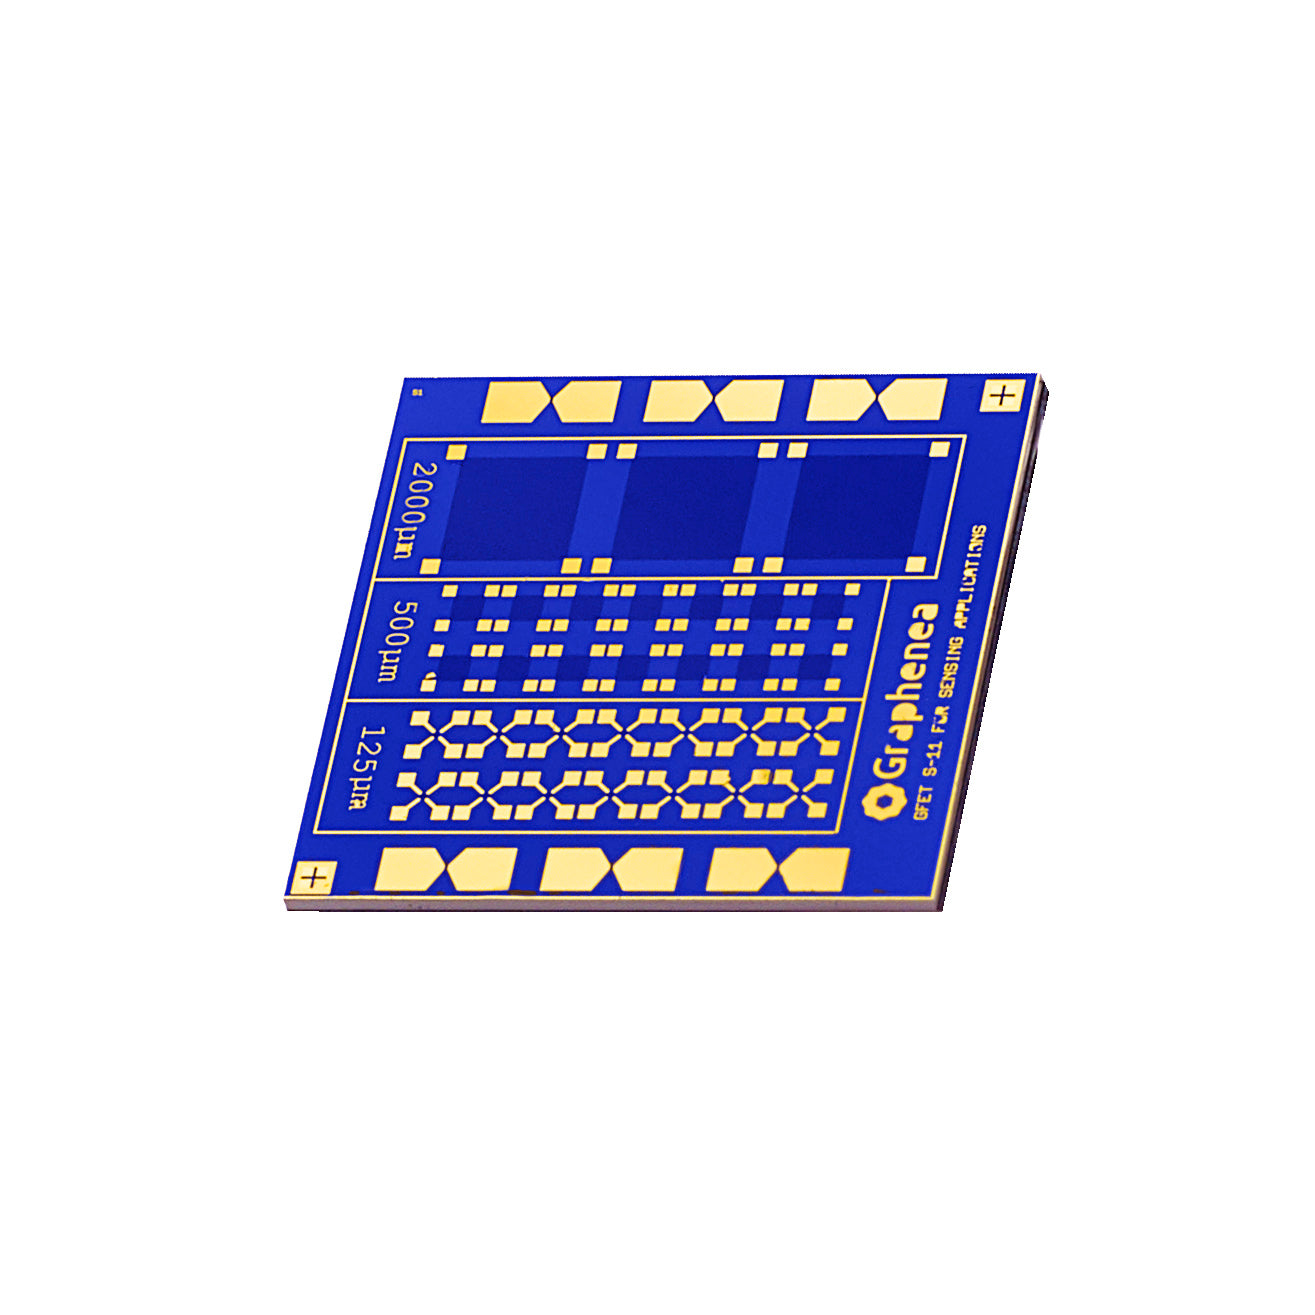 GFET-S11 for Sensing applications